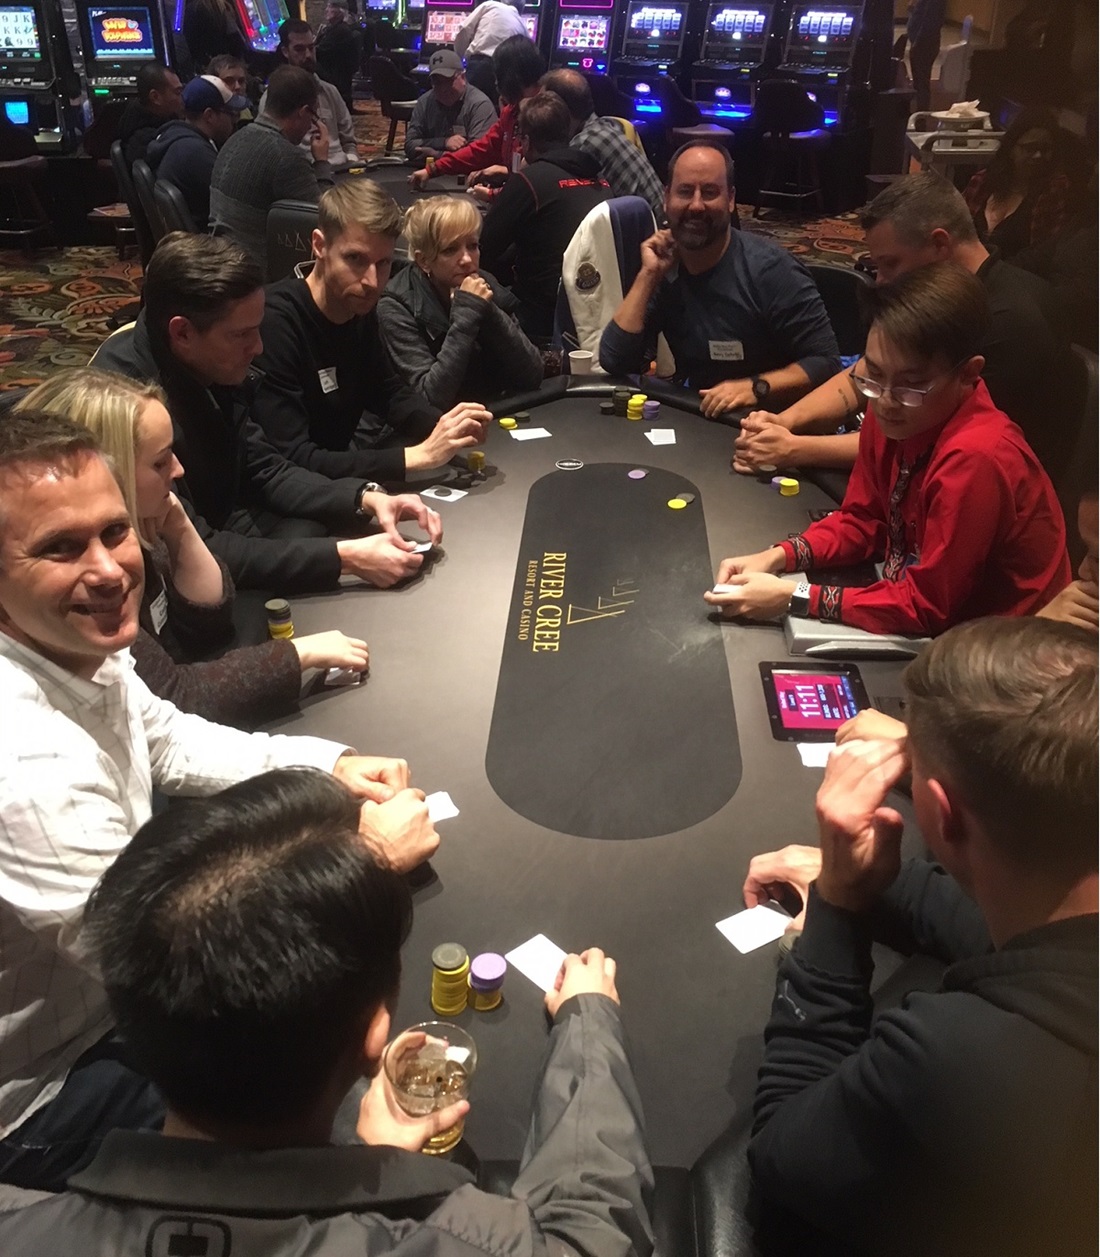 People at a poker table